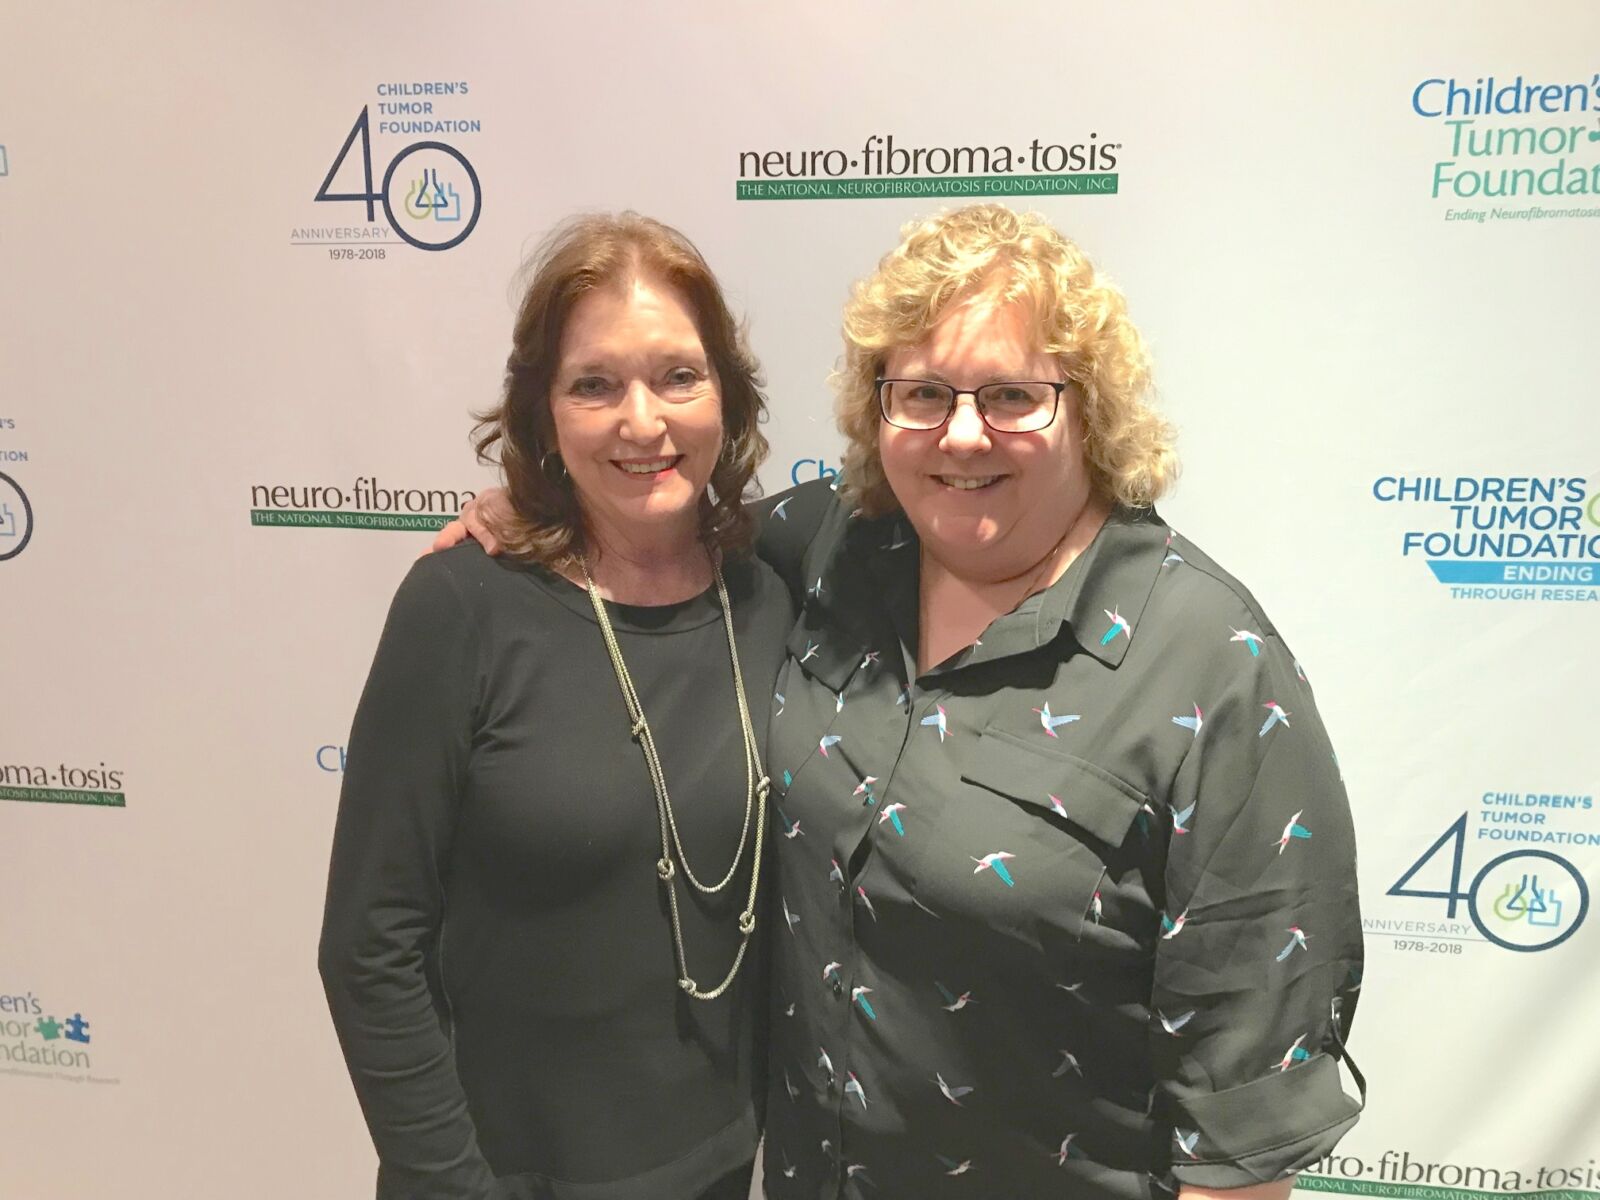 Two people standing in front of a backdrop with logos of the Children's Tumor Foundation and neurofibromatosis organizations. Both are smiling at the camera.